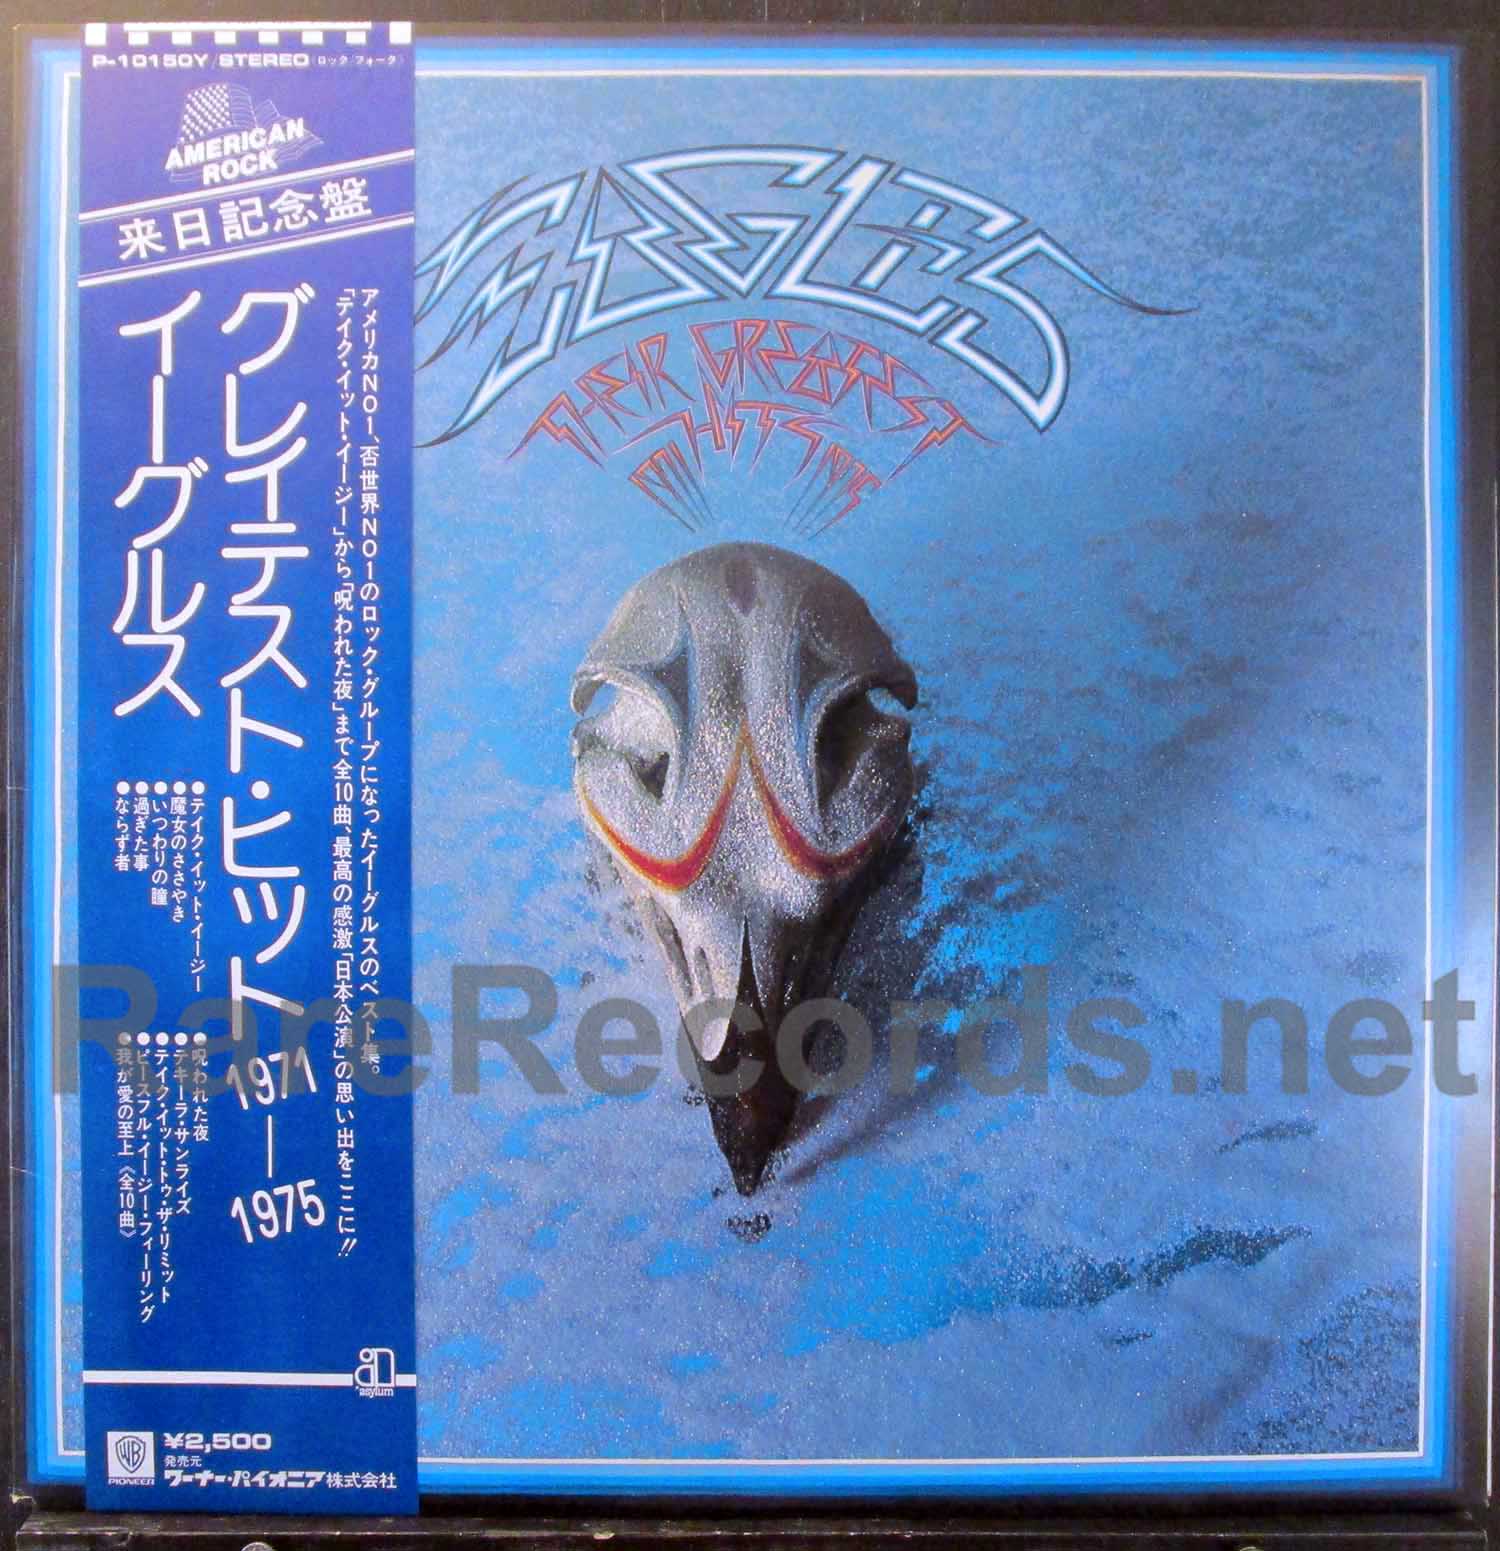 Eagles - Greatest Hits Japan LP with obi